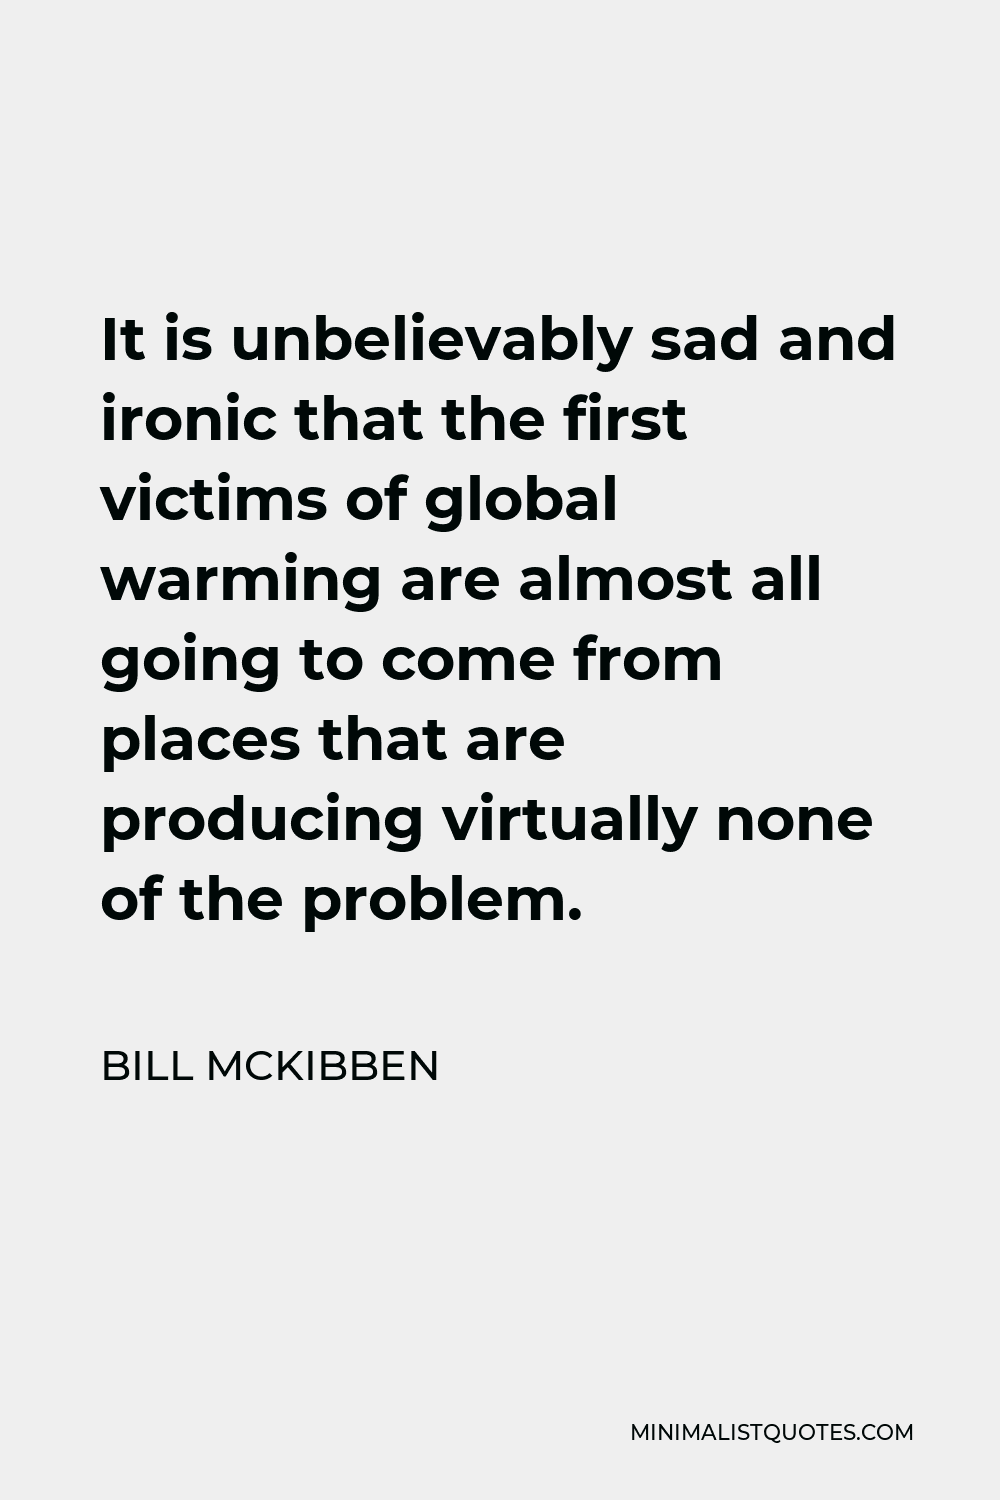 Bill McKibben Quote - It is unbelievably sad and ironic that the first victims of global warming are almost all going to come from places that are producing virtually none of the problem.